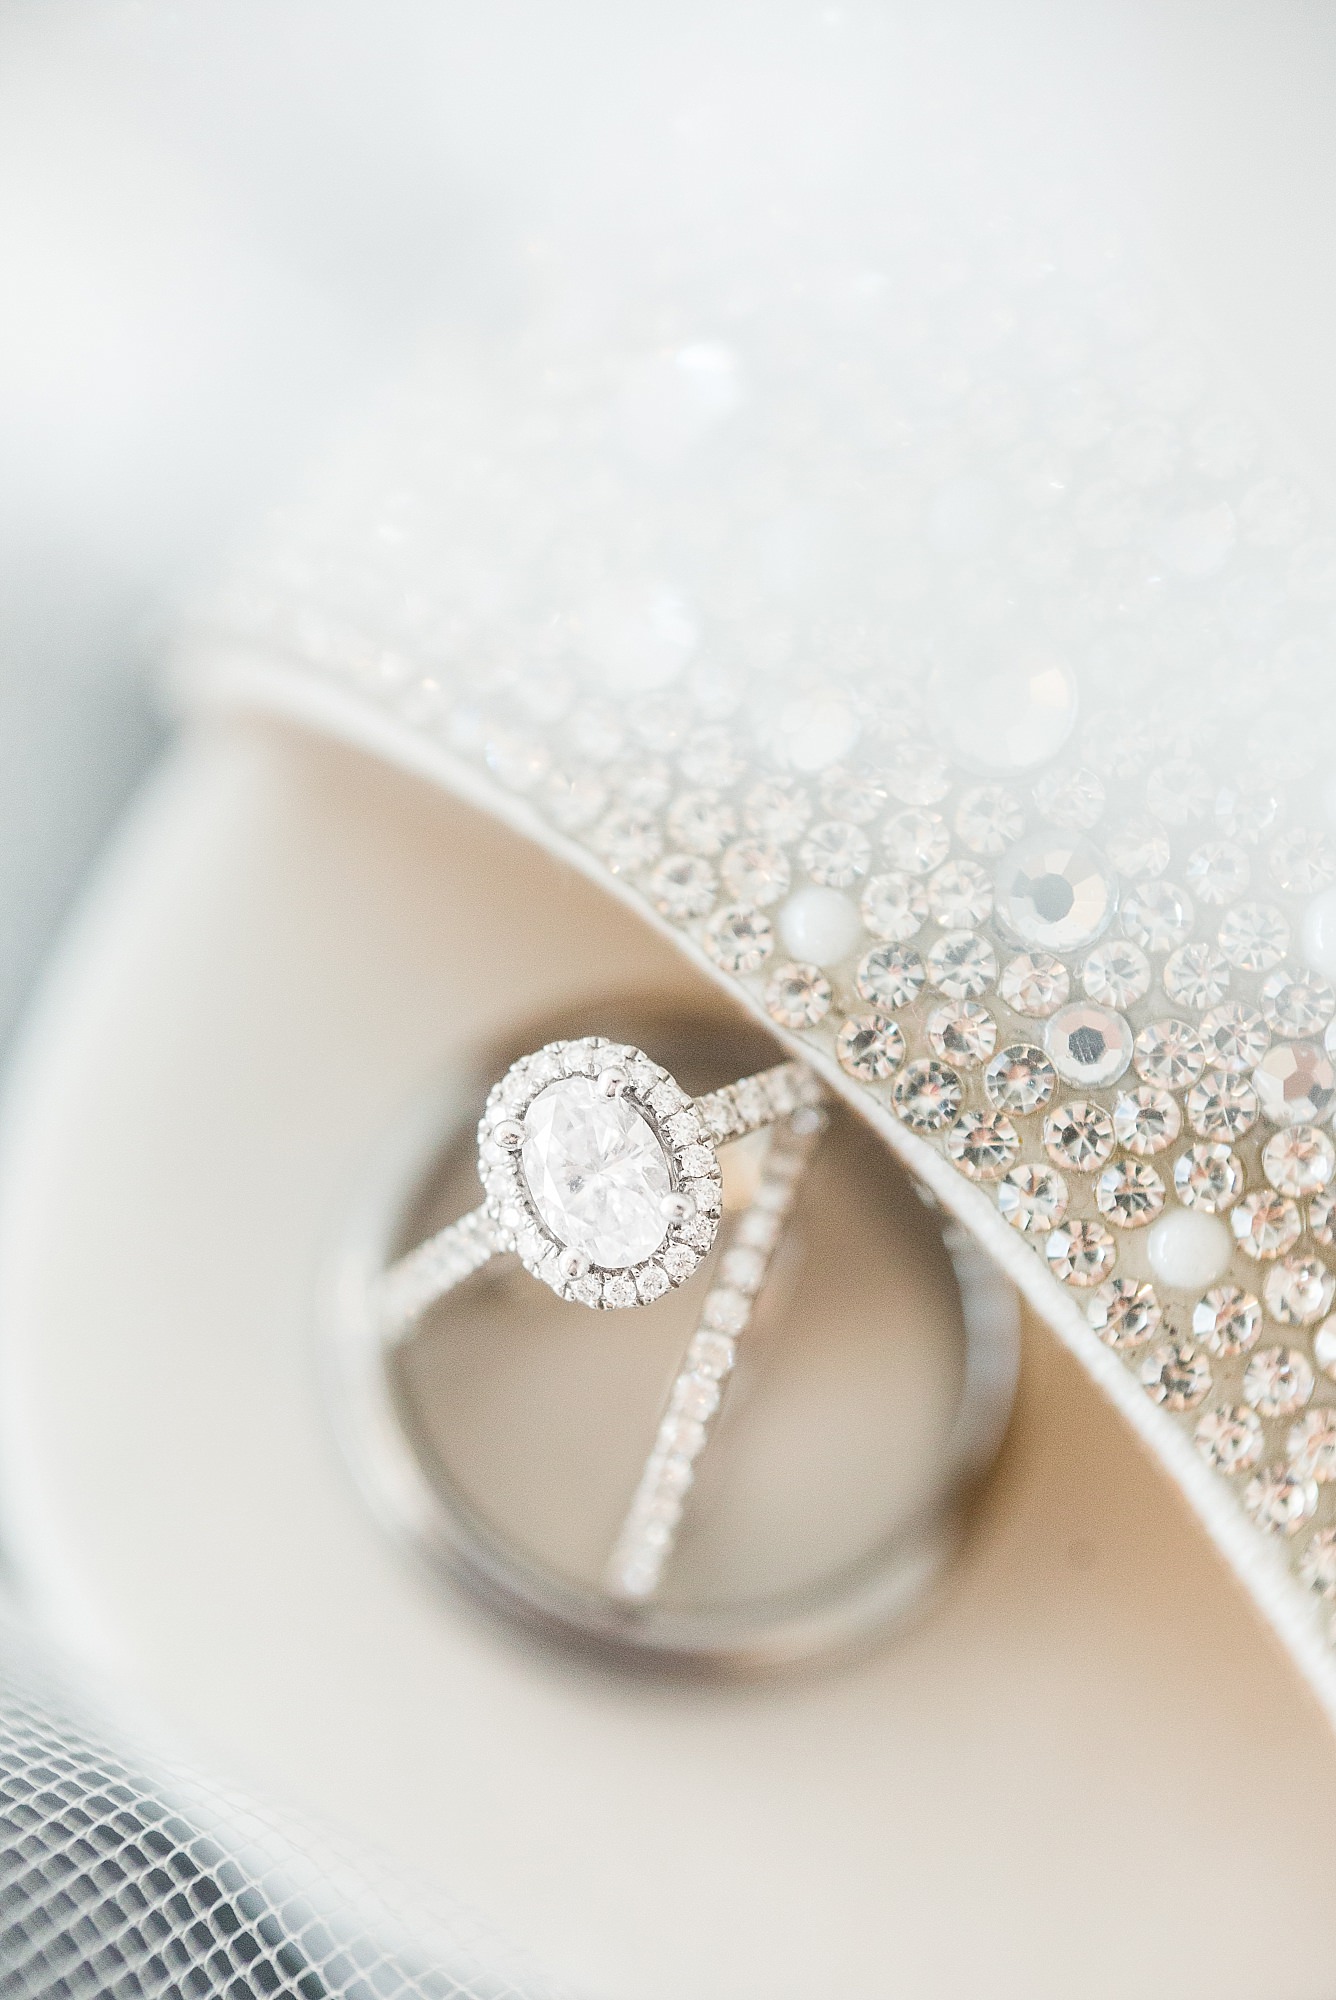 Ring and shoe details for a Glamorous Wedding at the Avalon